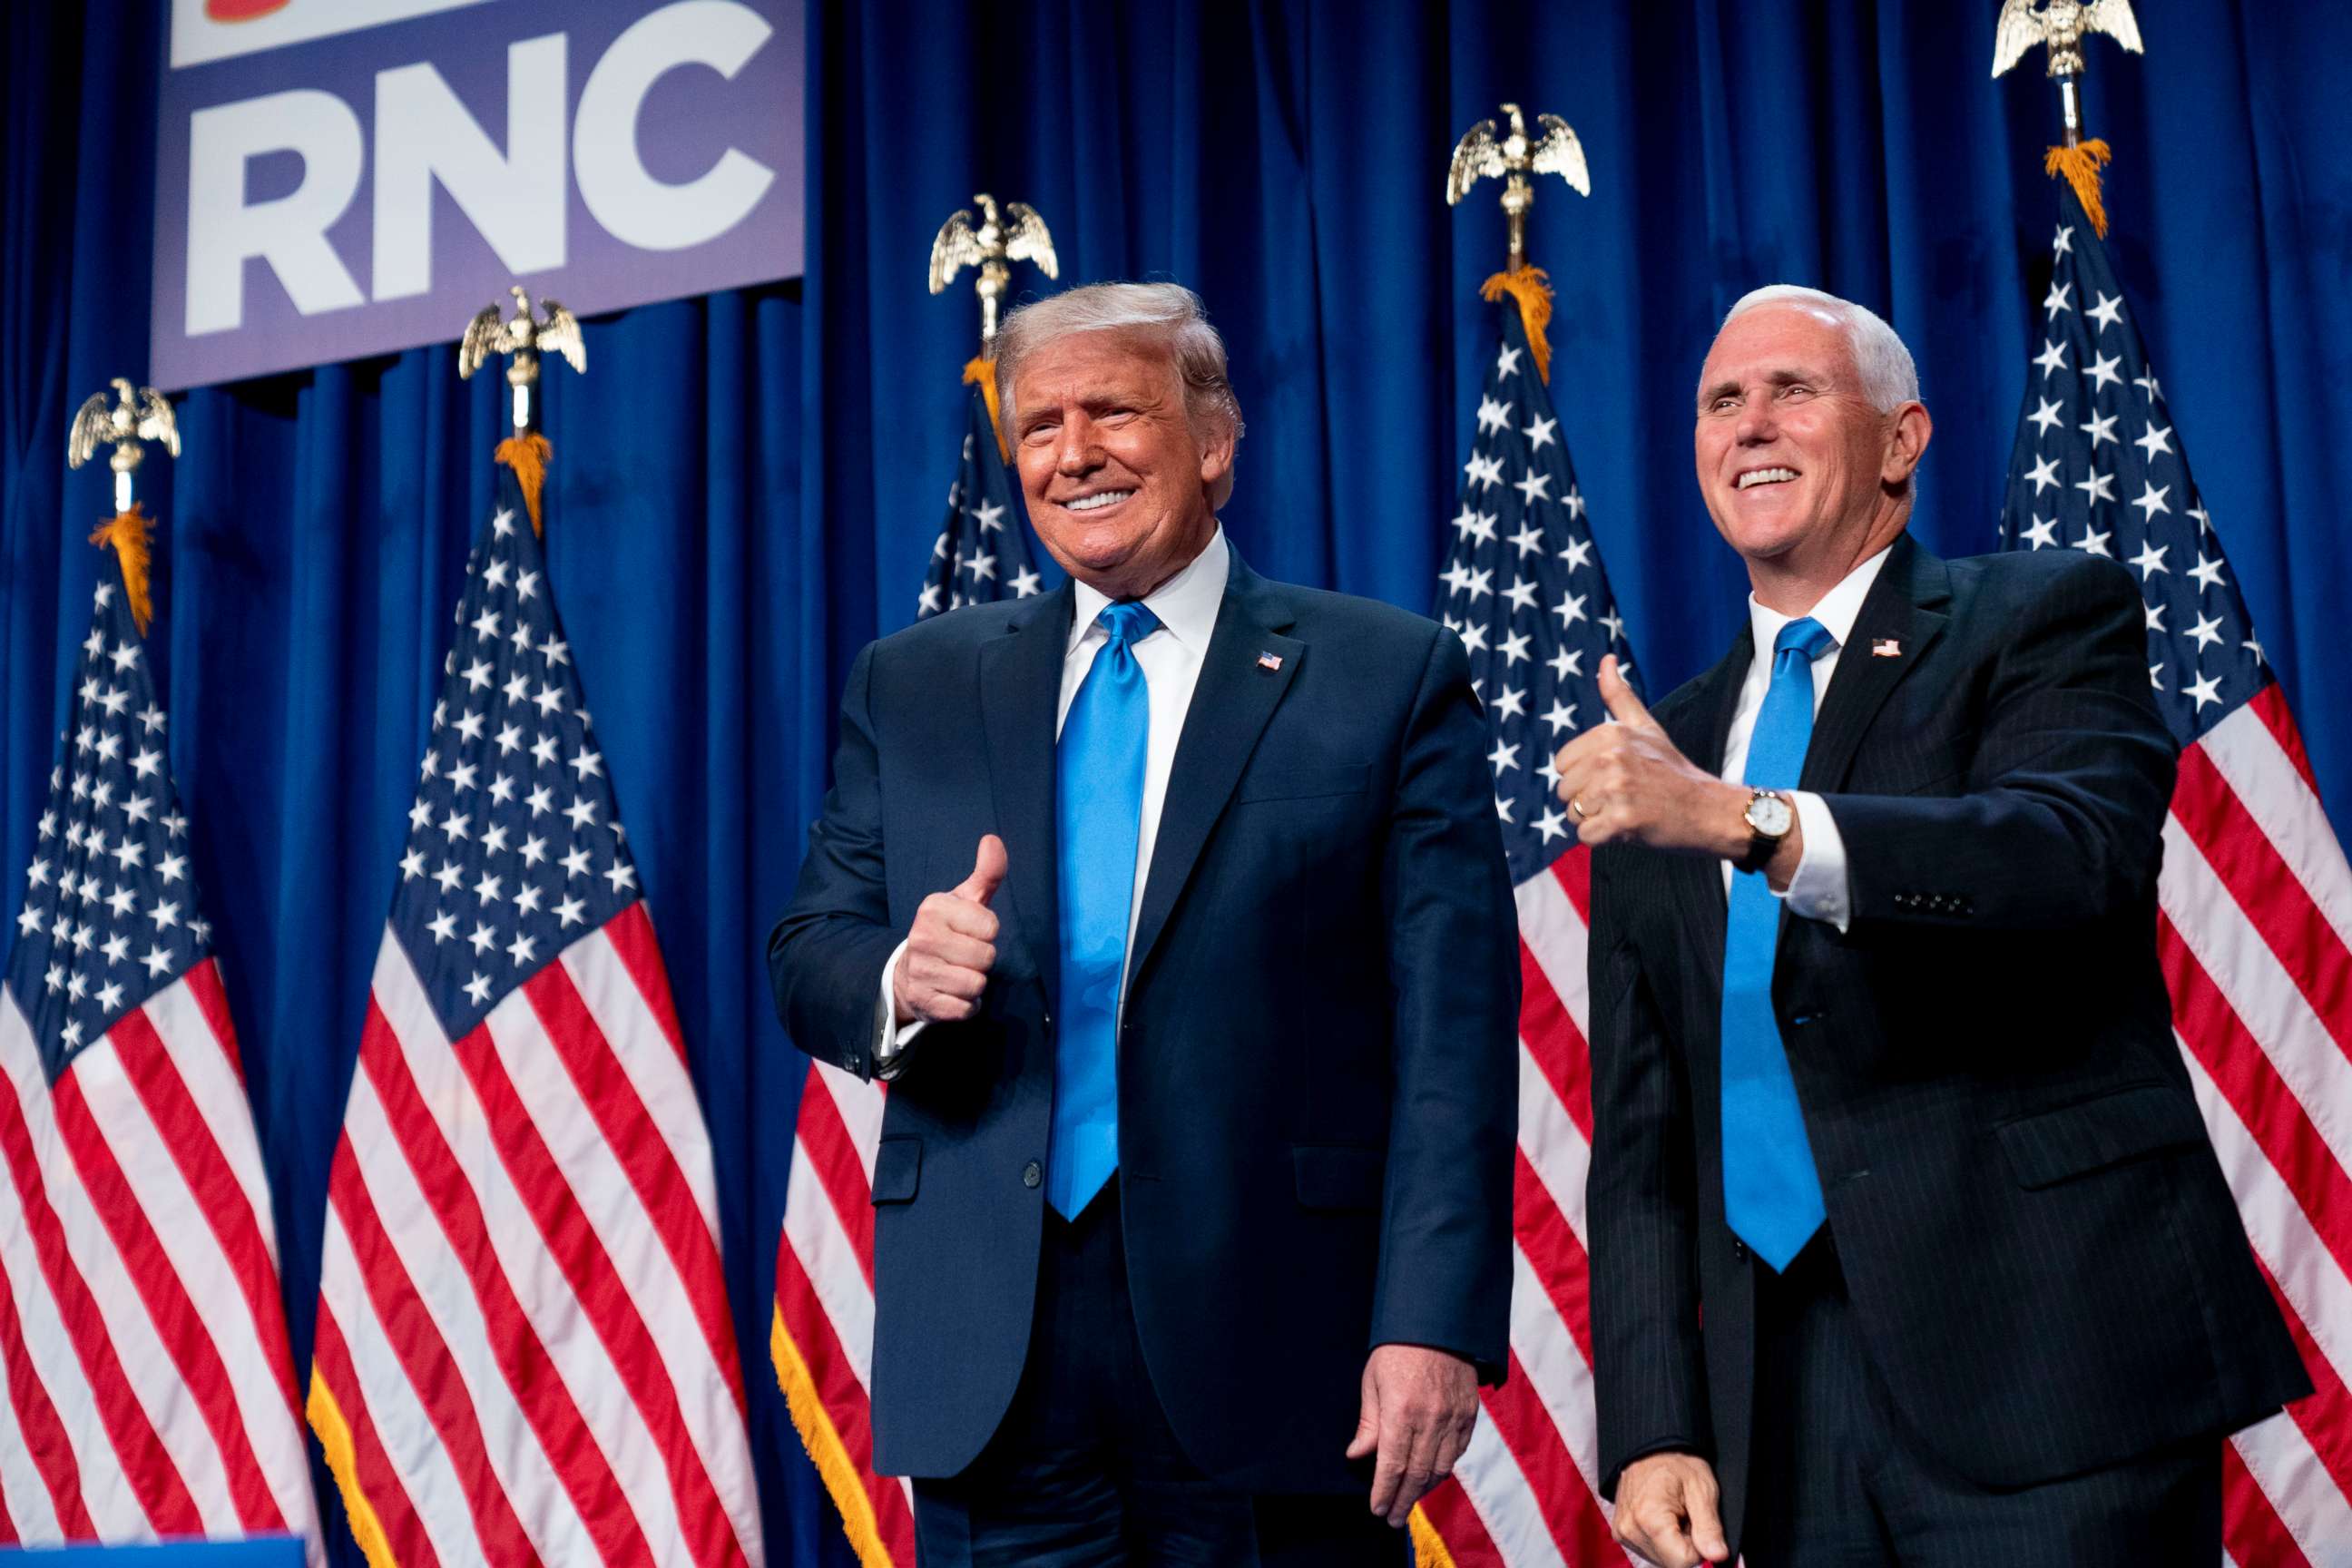 PHOTO: President Donald Trump and Vice President Mike Pence stand on stage during the first day of the 2020 Republican National Convention in Charlotte, N.C., Aug. 24, 2020.